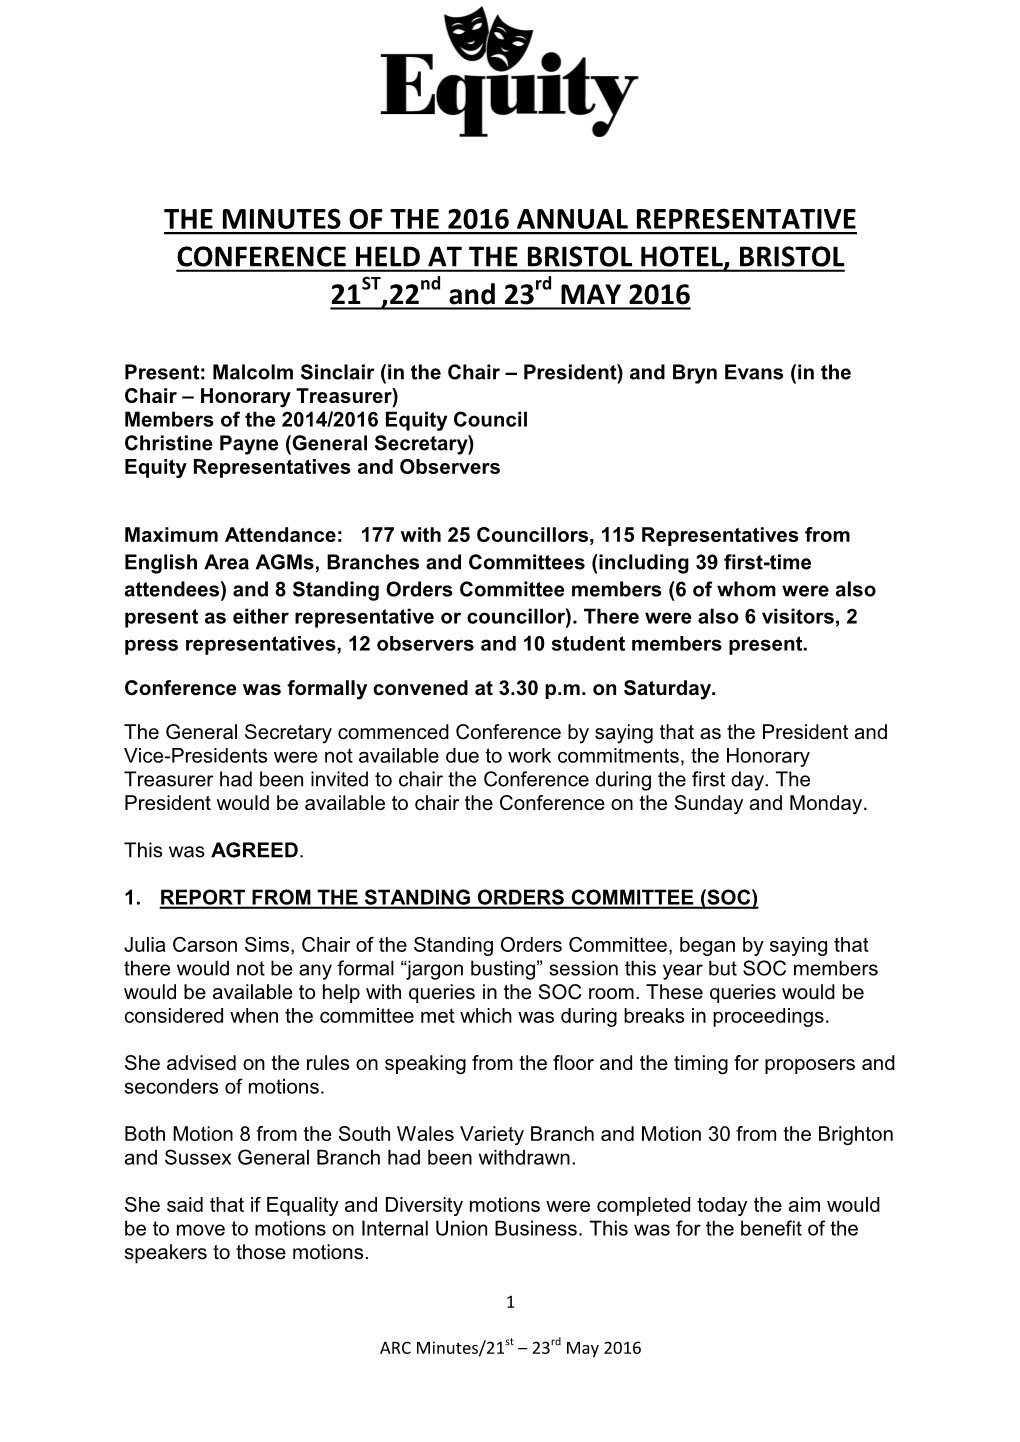 THE MINUTES of the 2016 ANNUAL REPRESENTATIVE CONFERENCE HELD at the BRISTOL HOTEL, BRISTOL 21ST,22Nd and 23Rd MAY 2016